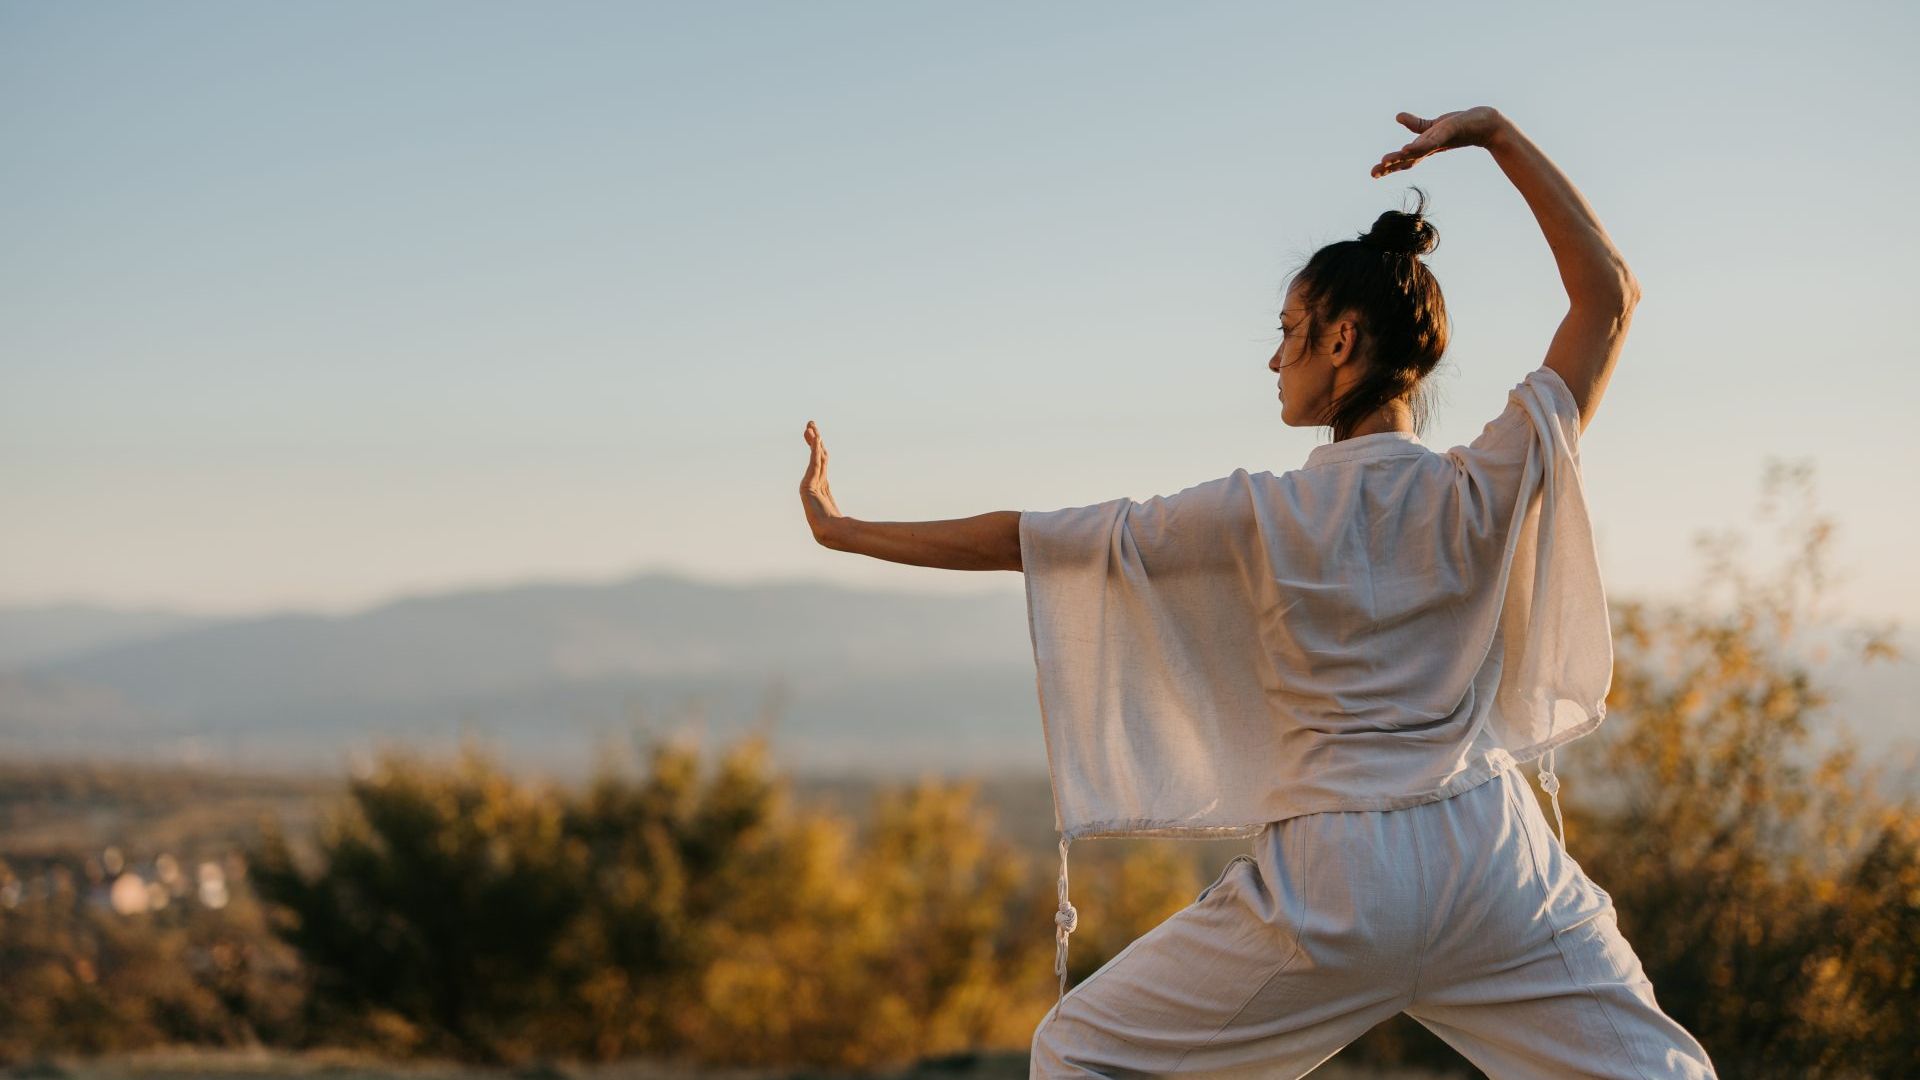 Exercise for high blood pressure: is tai chi better than an aerobic workout?